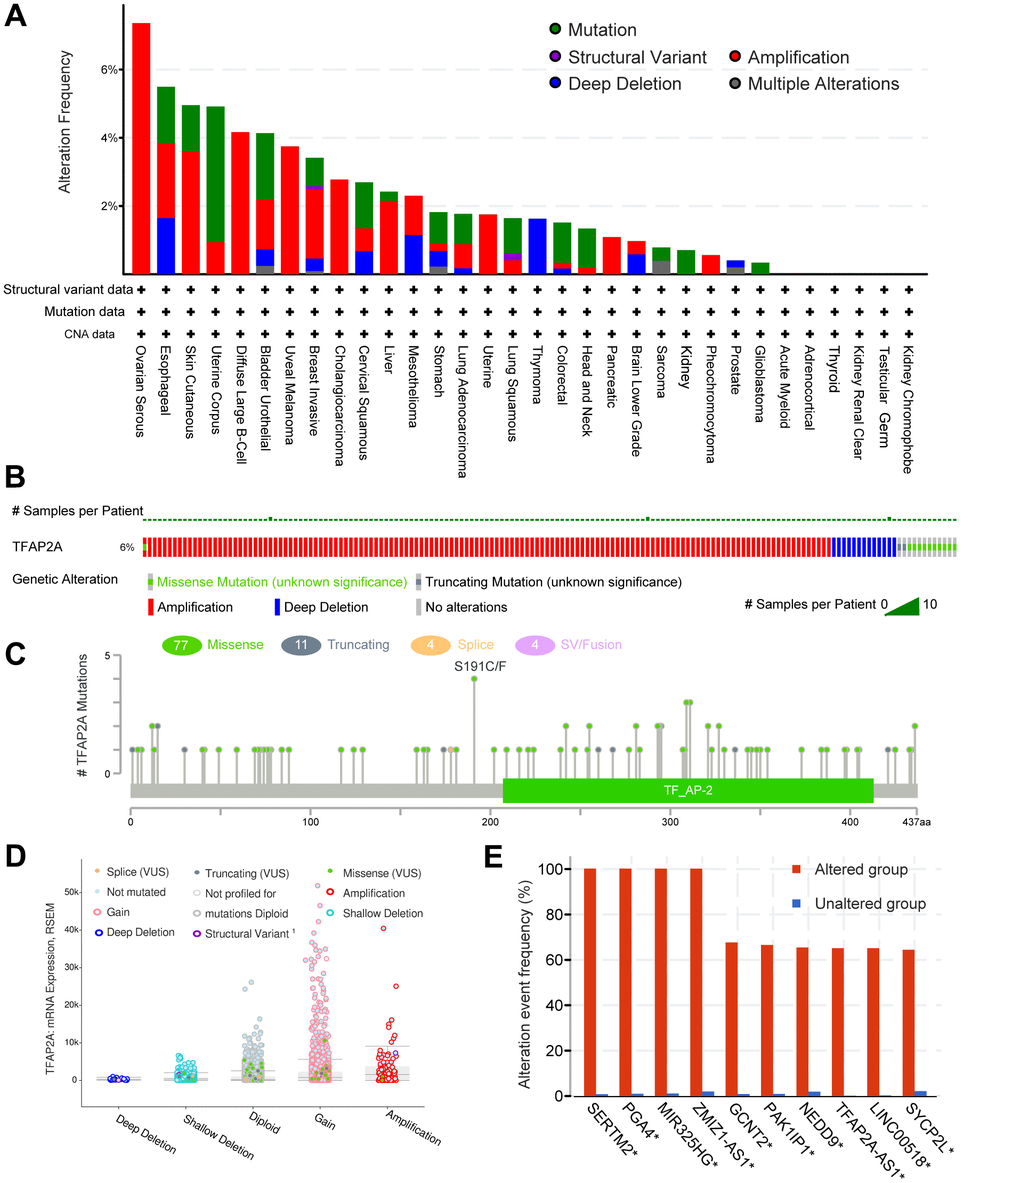 The genomic alterations of TFAP2A. (A) Details of TFAP2A genomic alterations in TCGA pan-cancer datasets; (B) The summary of TFAP2A genomic alterations in cancer cohort; (C) TFAP2A genetic mutations counts, types, and sites. (D) The correction of TFAP2A mRNA expression with main types of its genomic alterations; (E) The alteration frequency comparisons of TFAP2A related genes between TFAP2A altered and unaltered group.